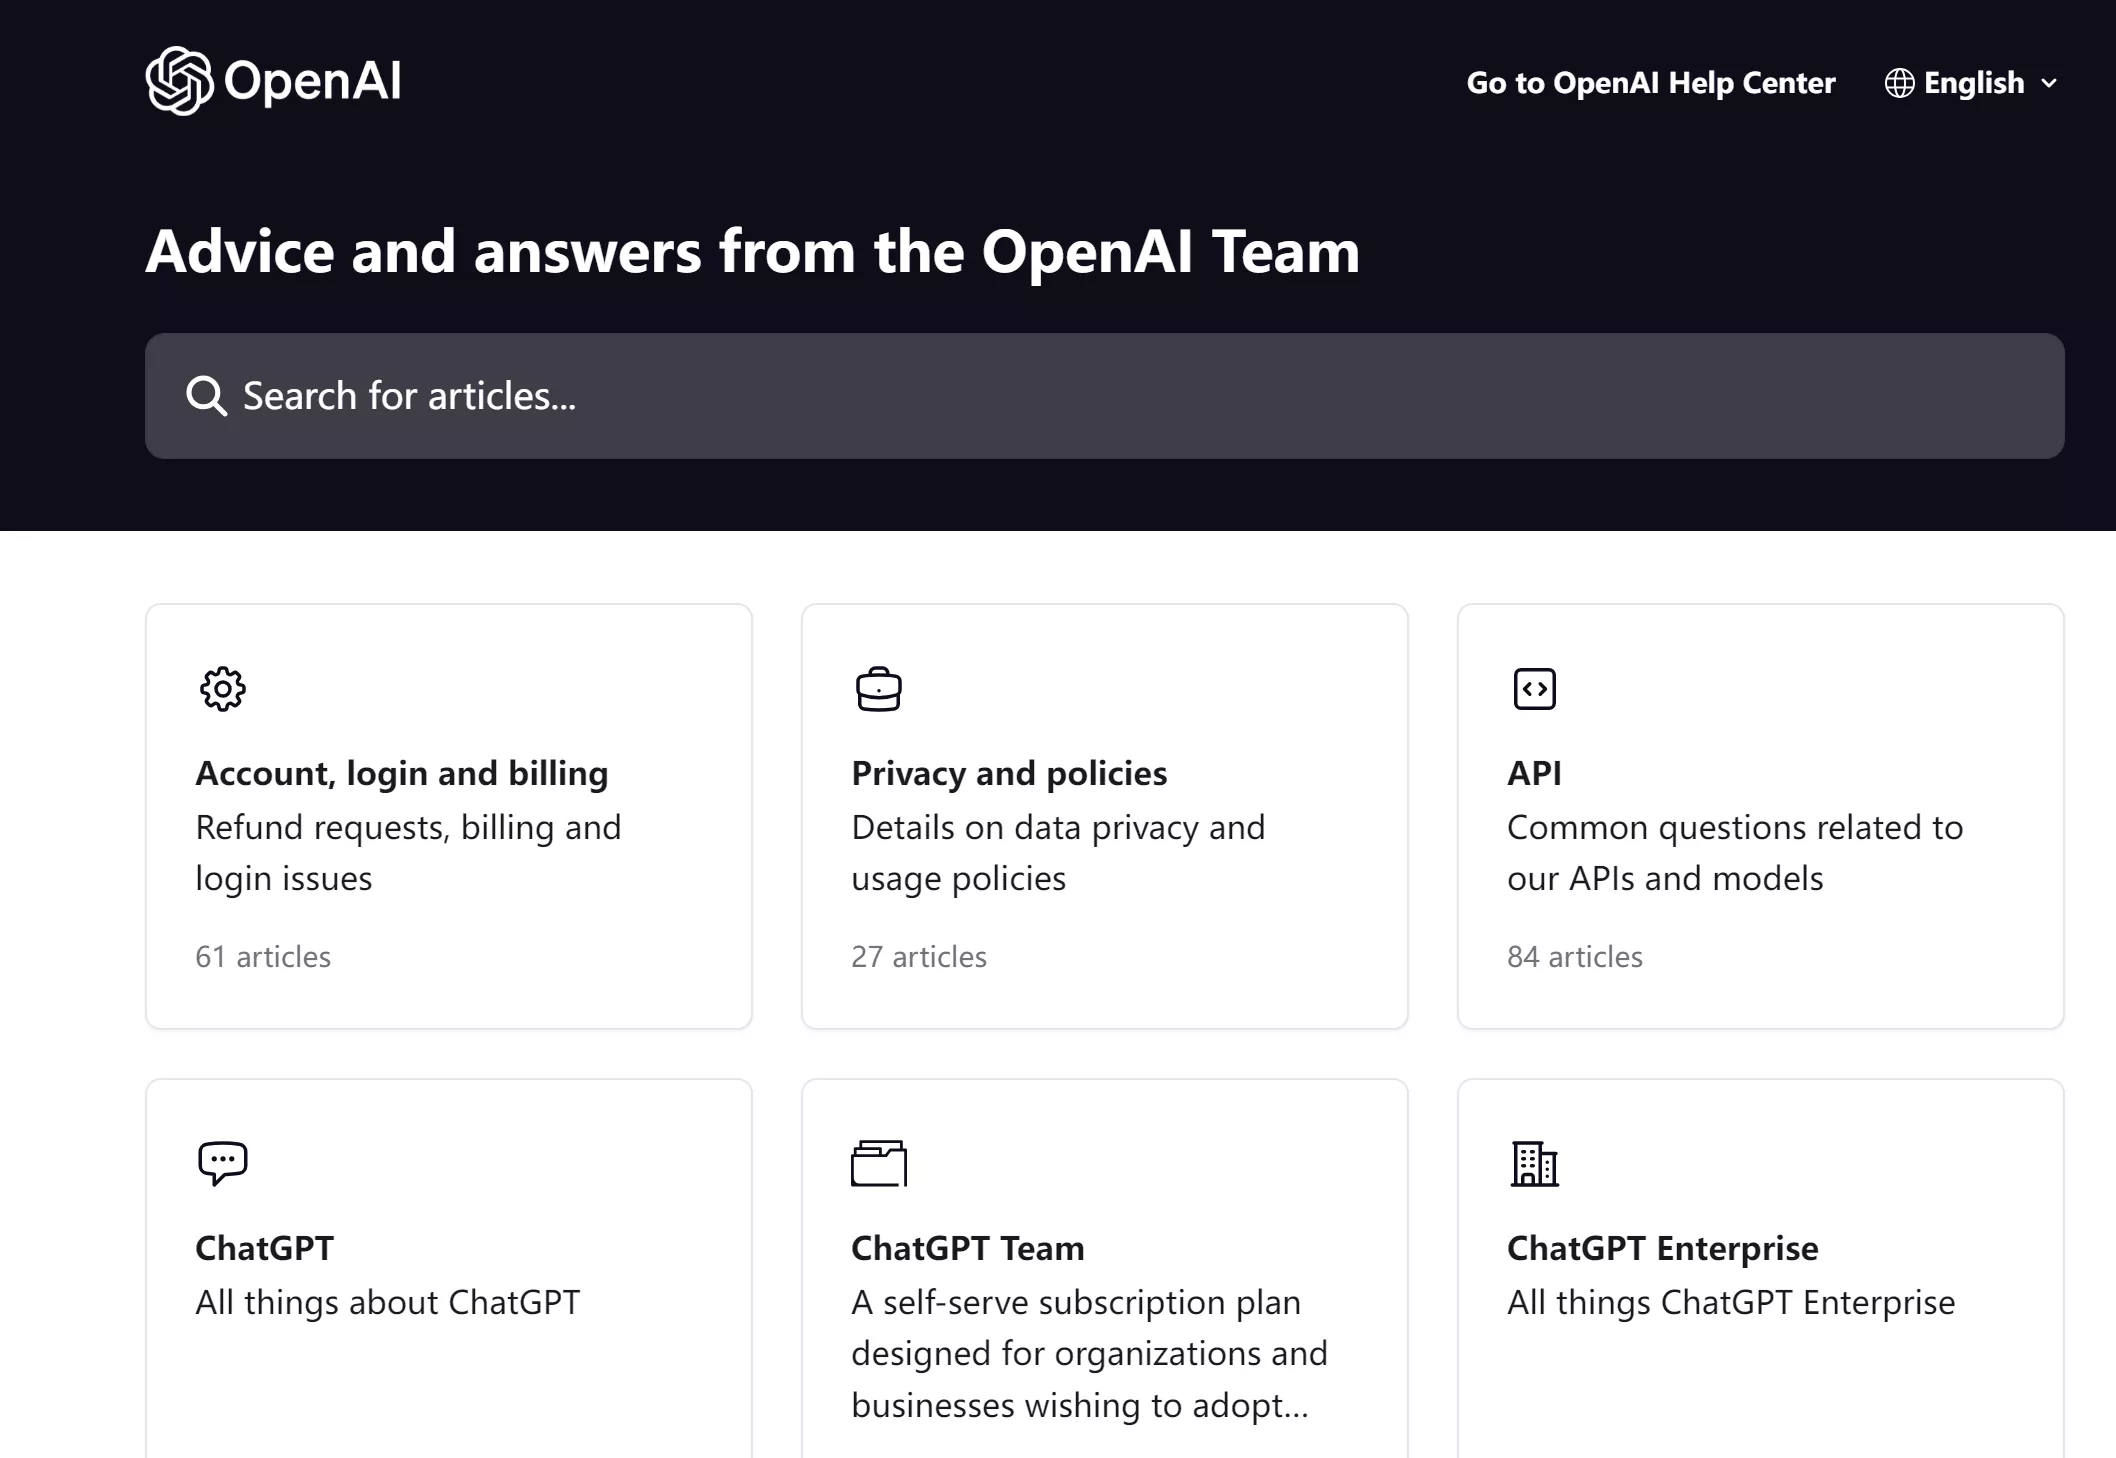 chatgpt sorry you have been blocked contact openai support team